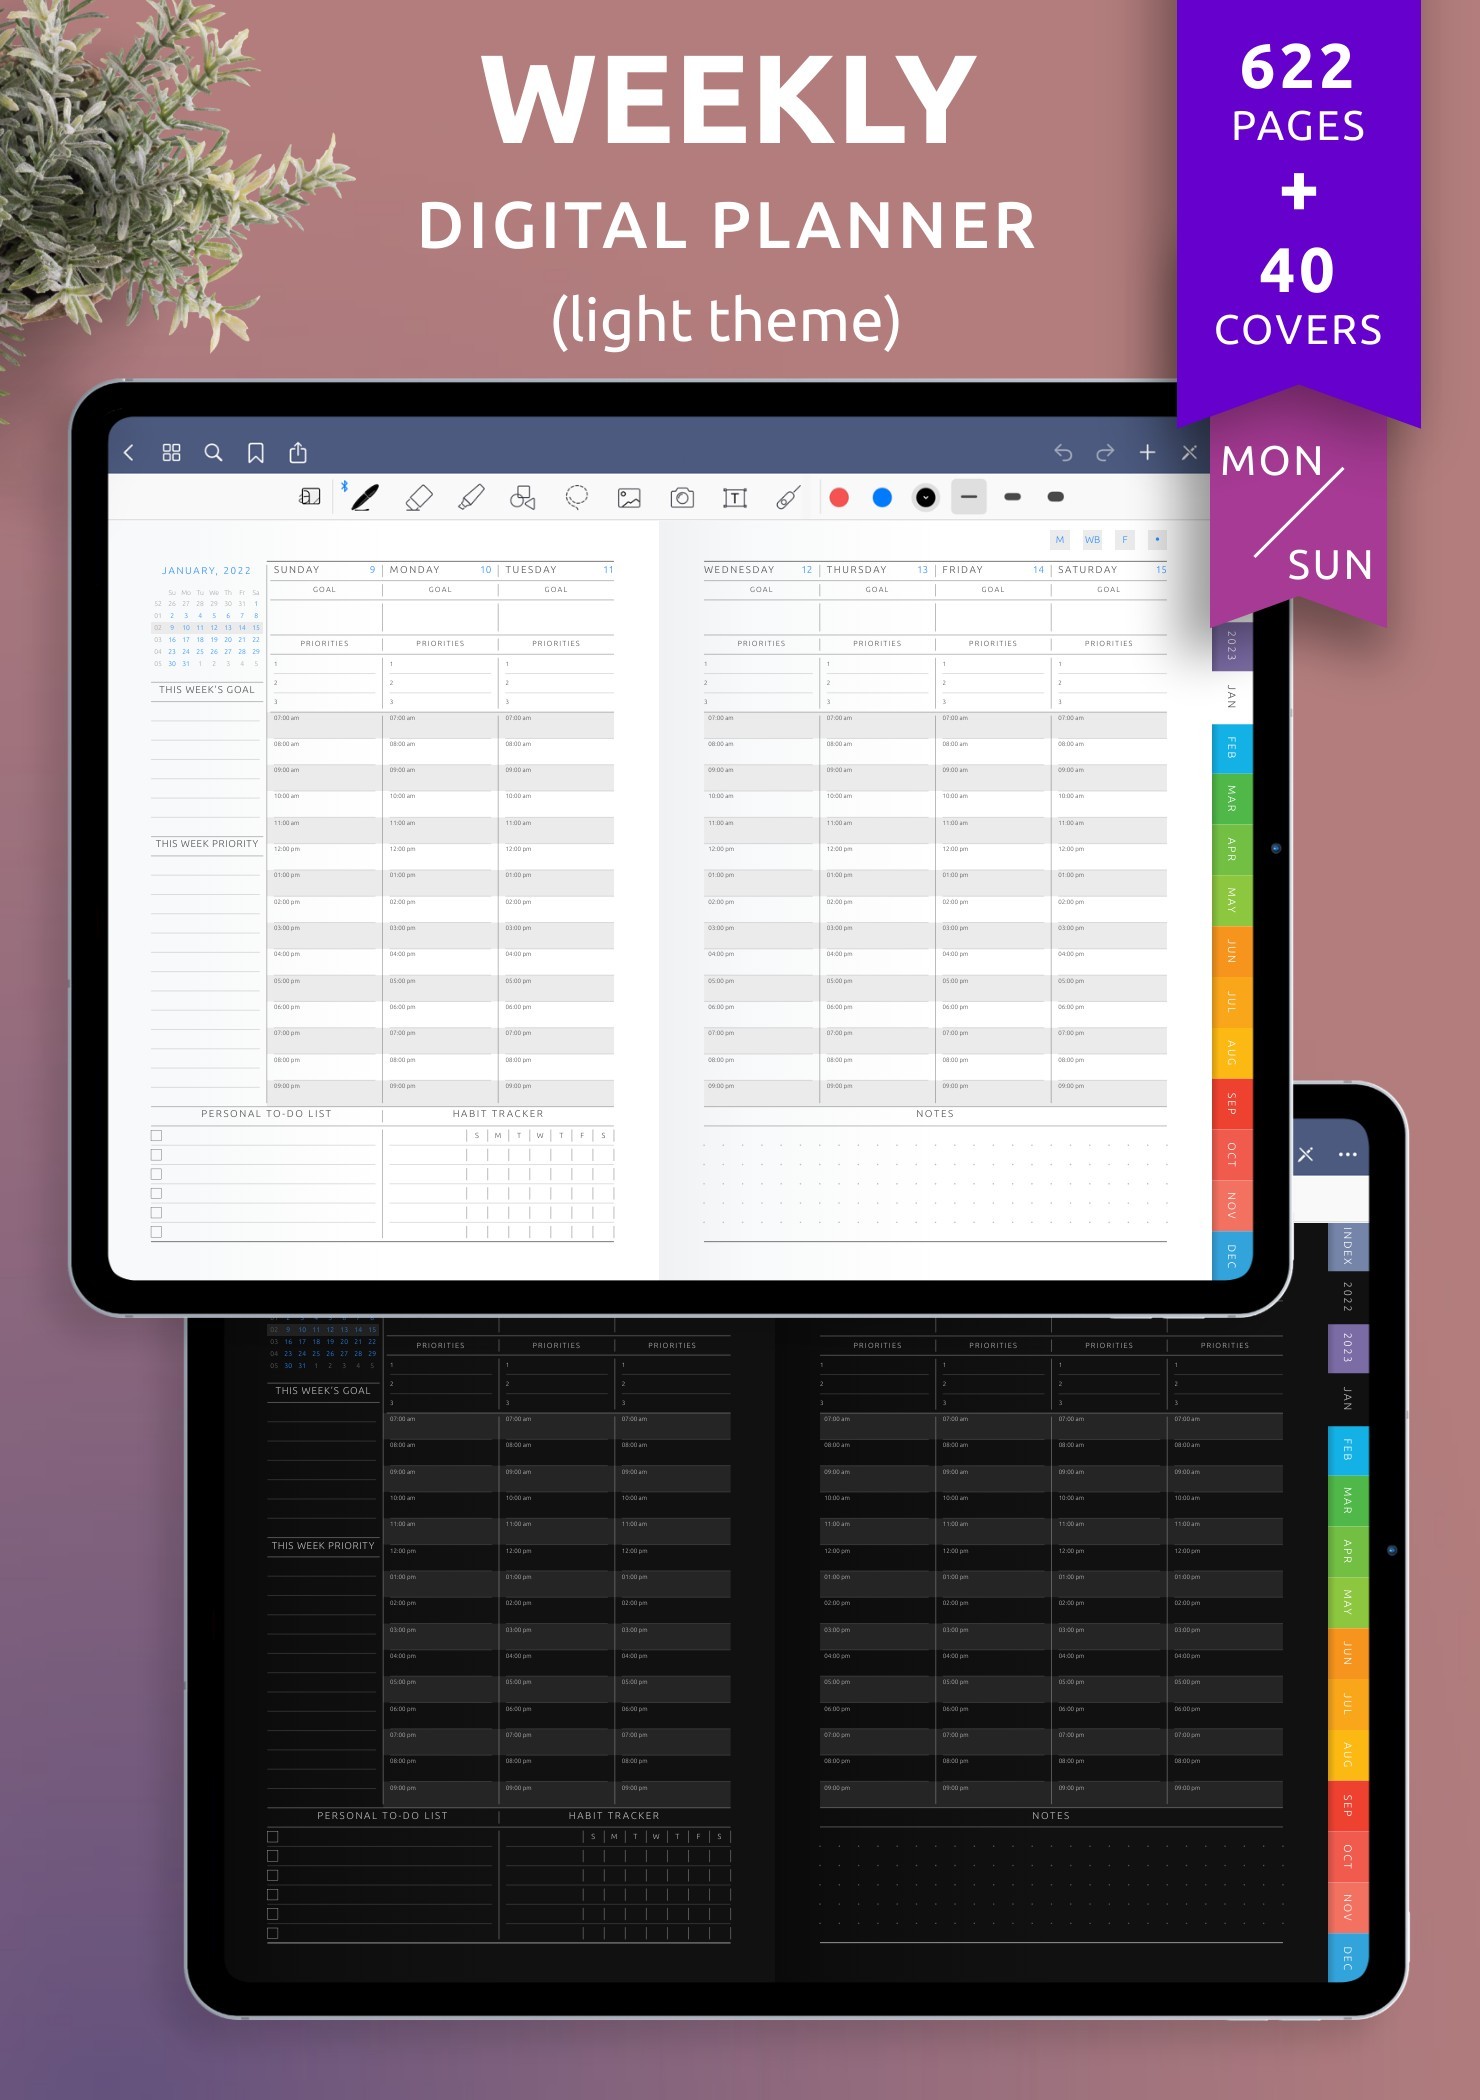 download-weekly-digital-planner-pdf-for-goodnotes-ipad